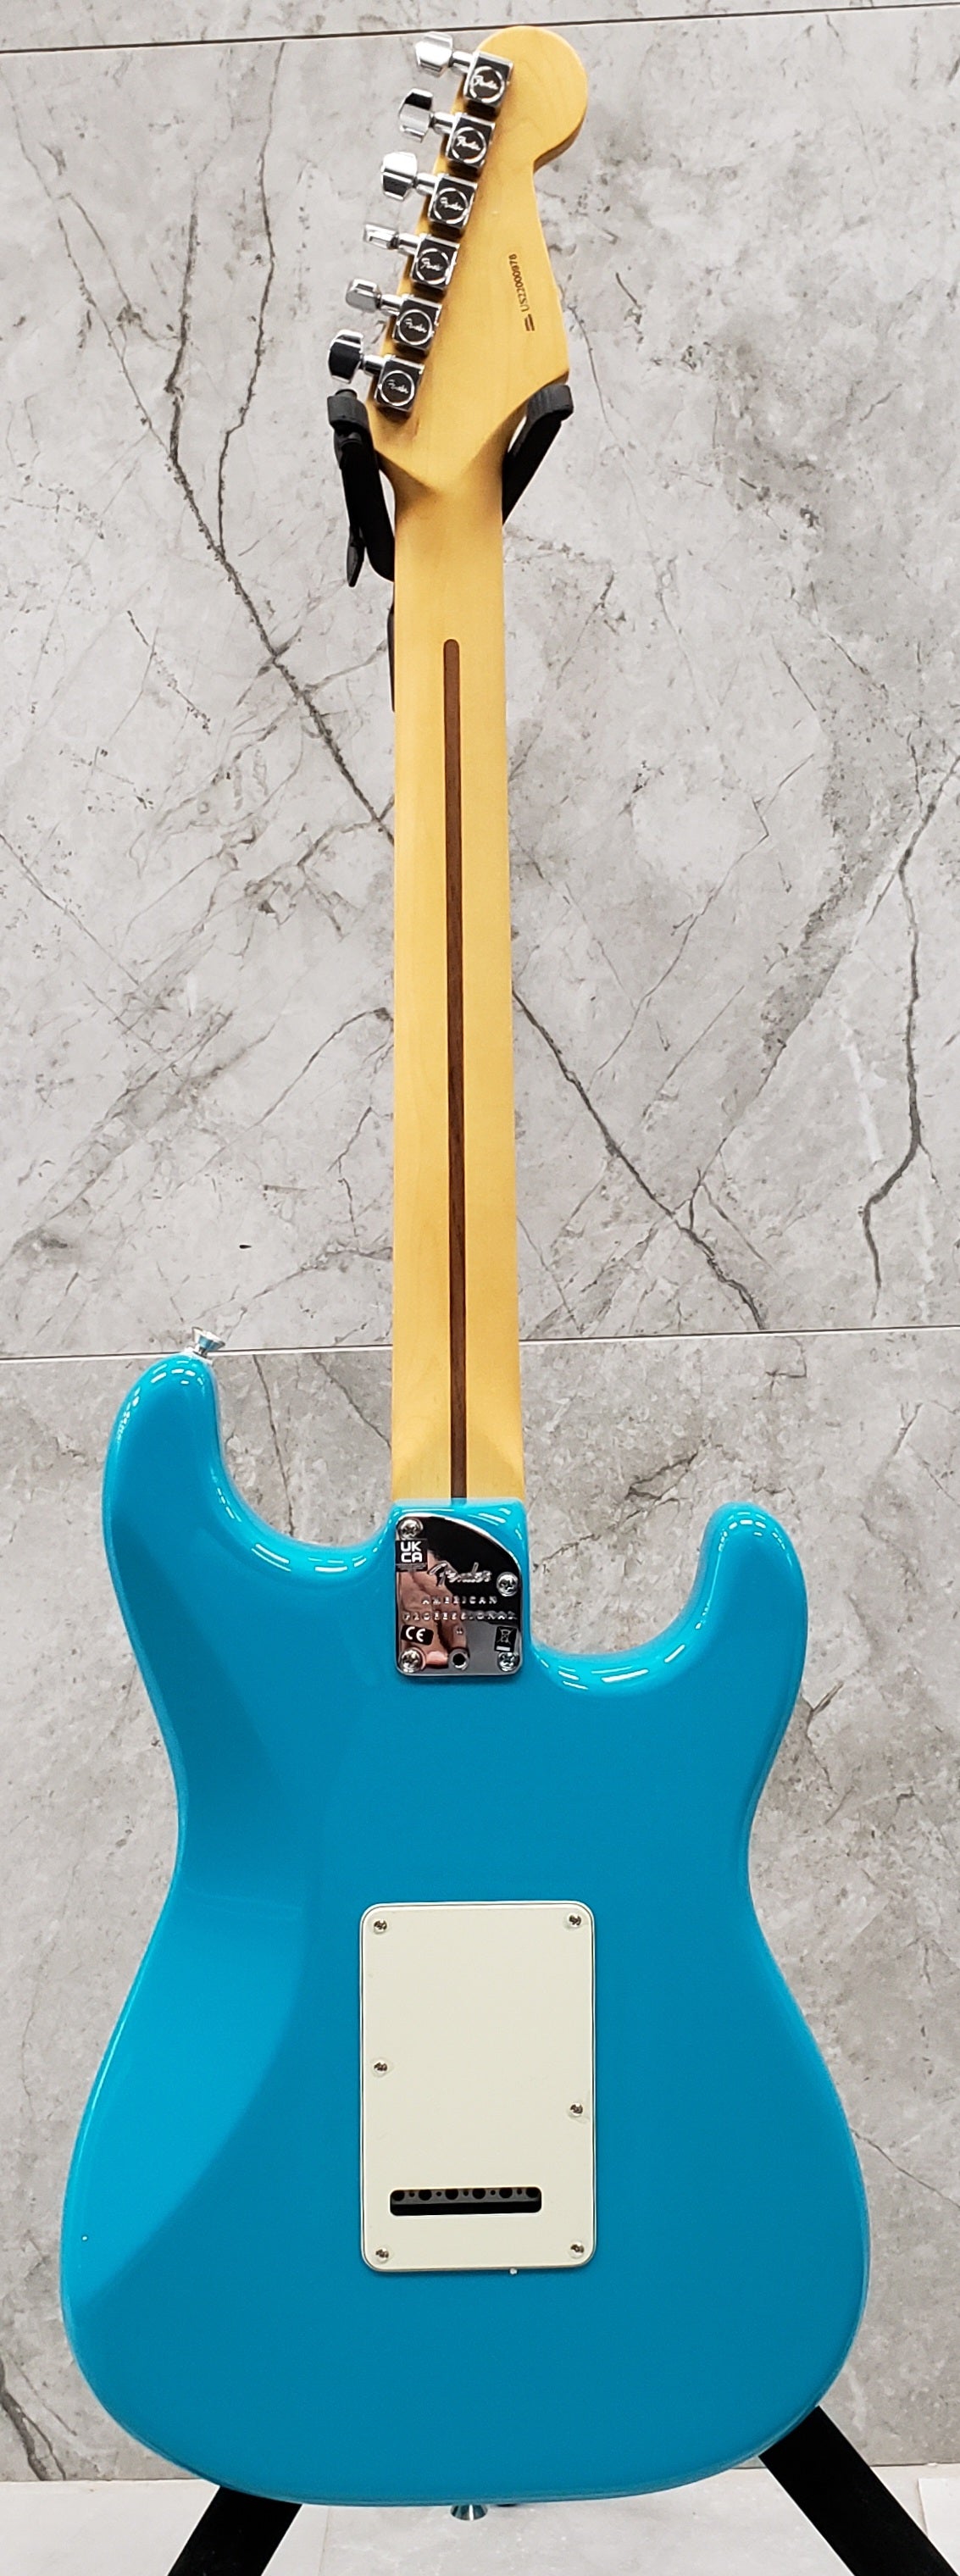 Fender American Professional II Stratocaster Left Hand Rosewood Fingerboard Miami Blue F-0113930719 SERIAL NUMBER US22000978 - 7.8 LBS